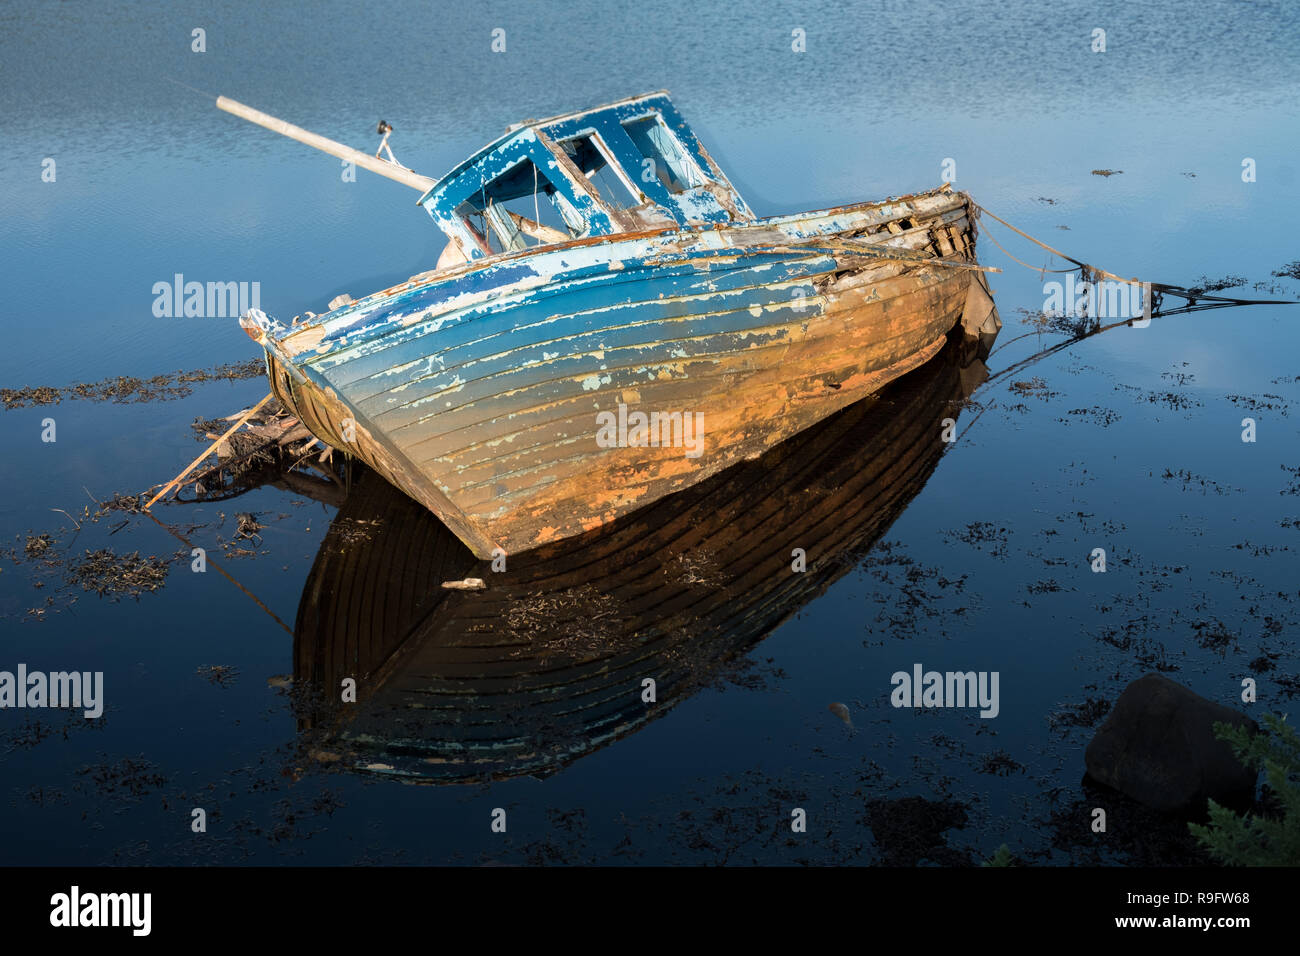 Wreck of a fishing boat on the wild atlantic coast of Ireland.  Faded paint blue ship in lying sideways with perfect reflection in low tide waters. Stock Photo